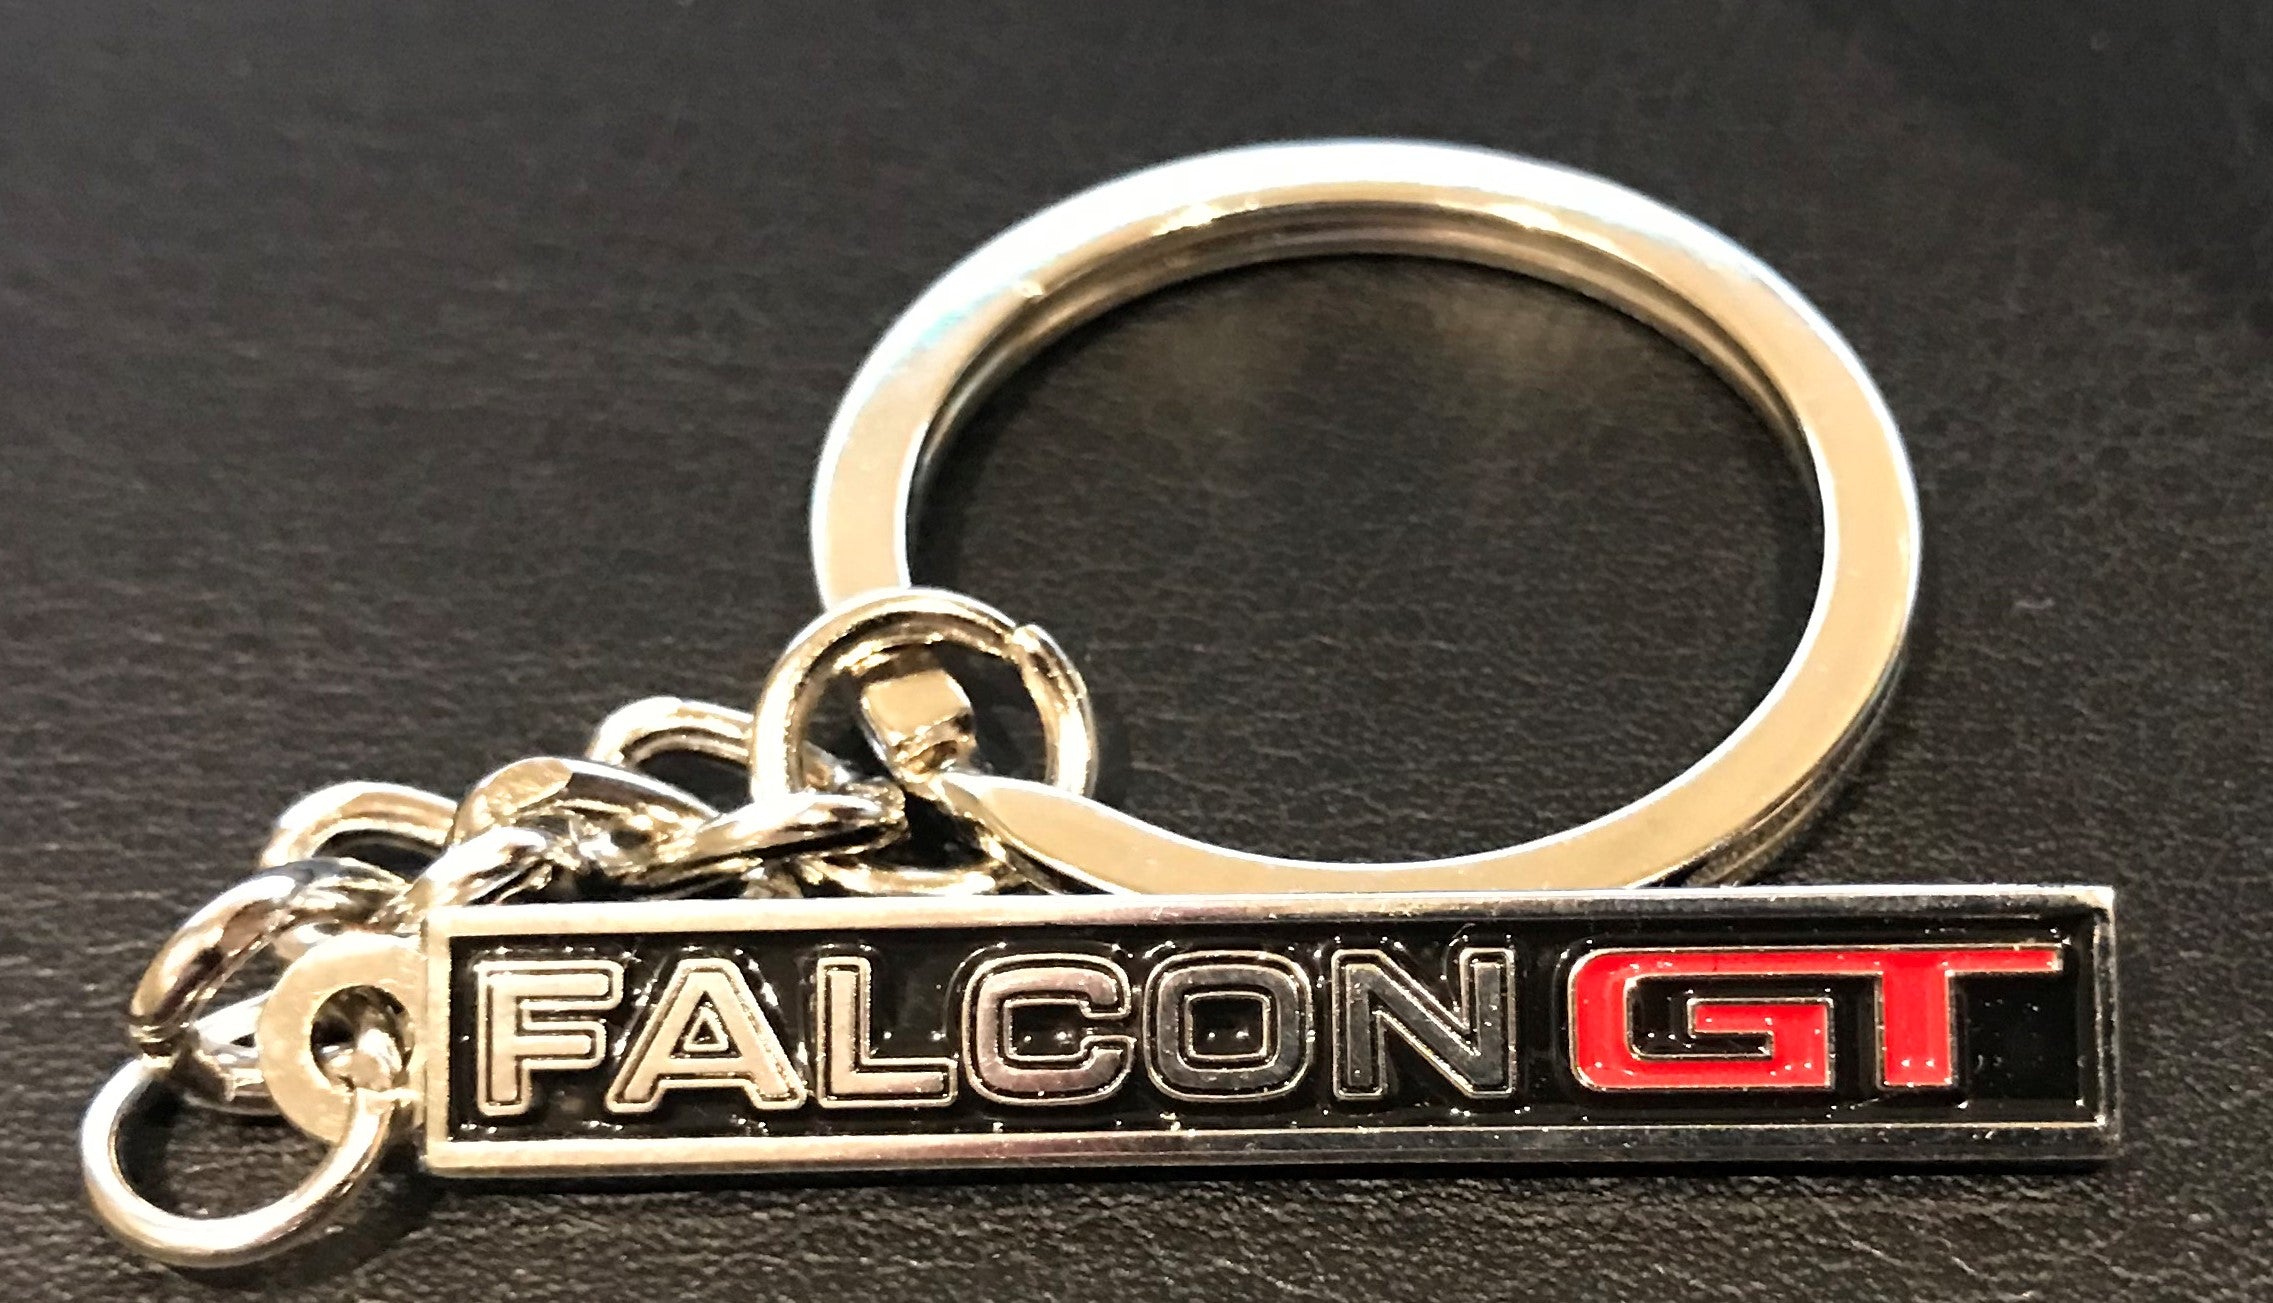 Limited Edition 'Falcon GT' Key Ring